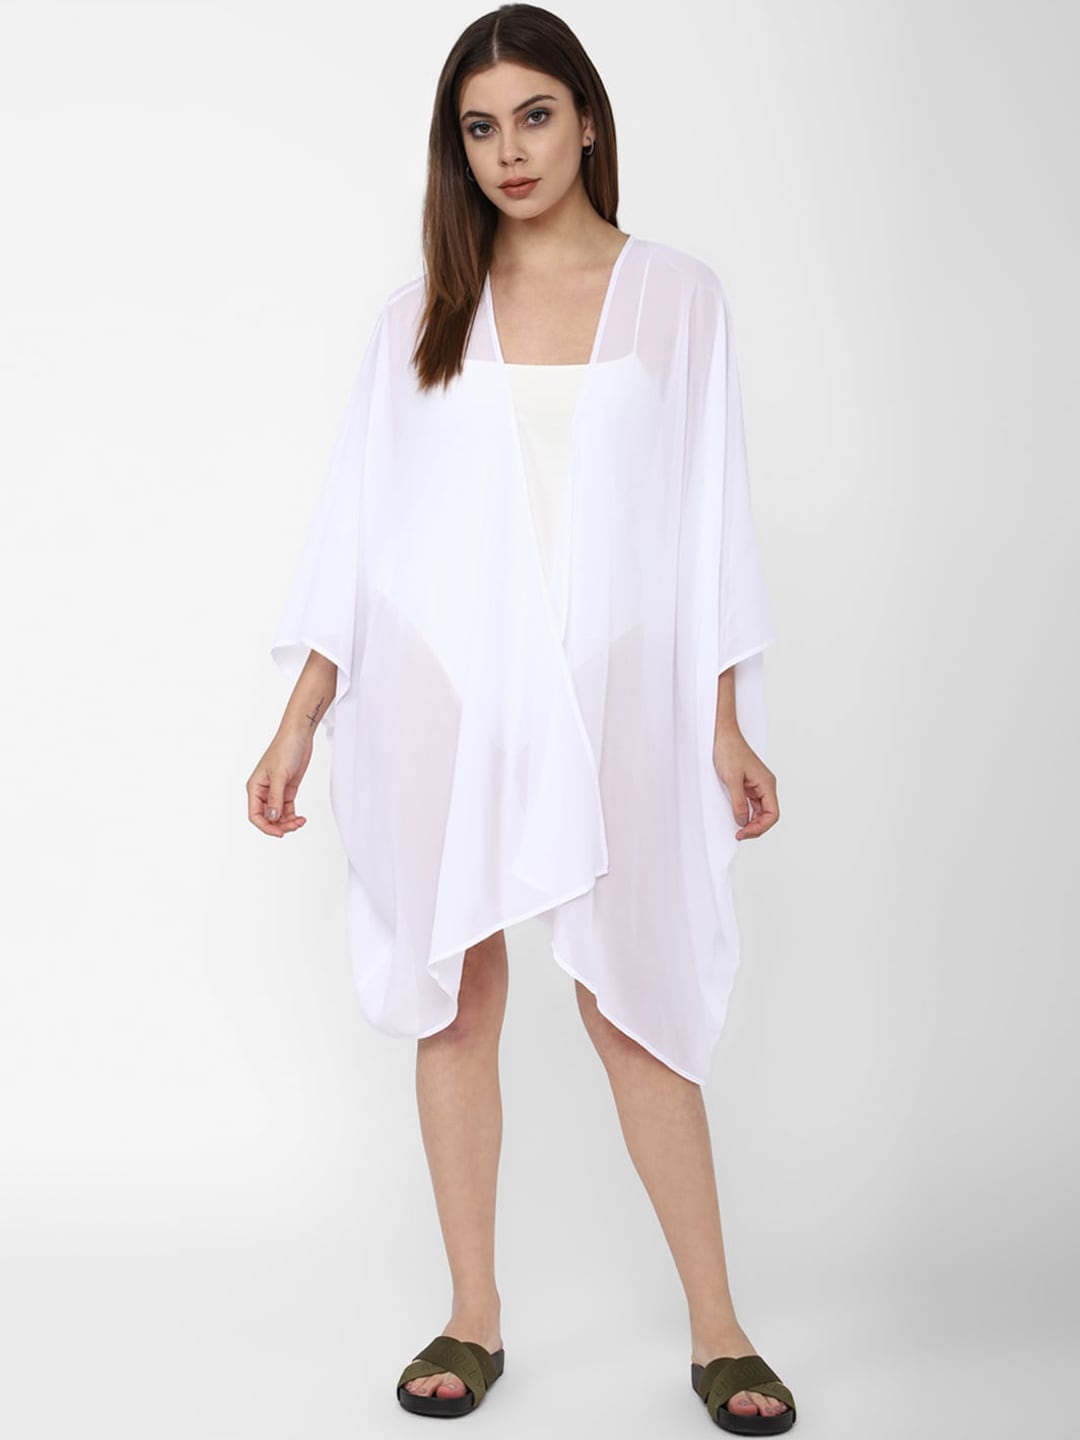 FOREVER 21 White Solid Cover Up Dress Price in India